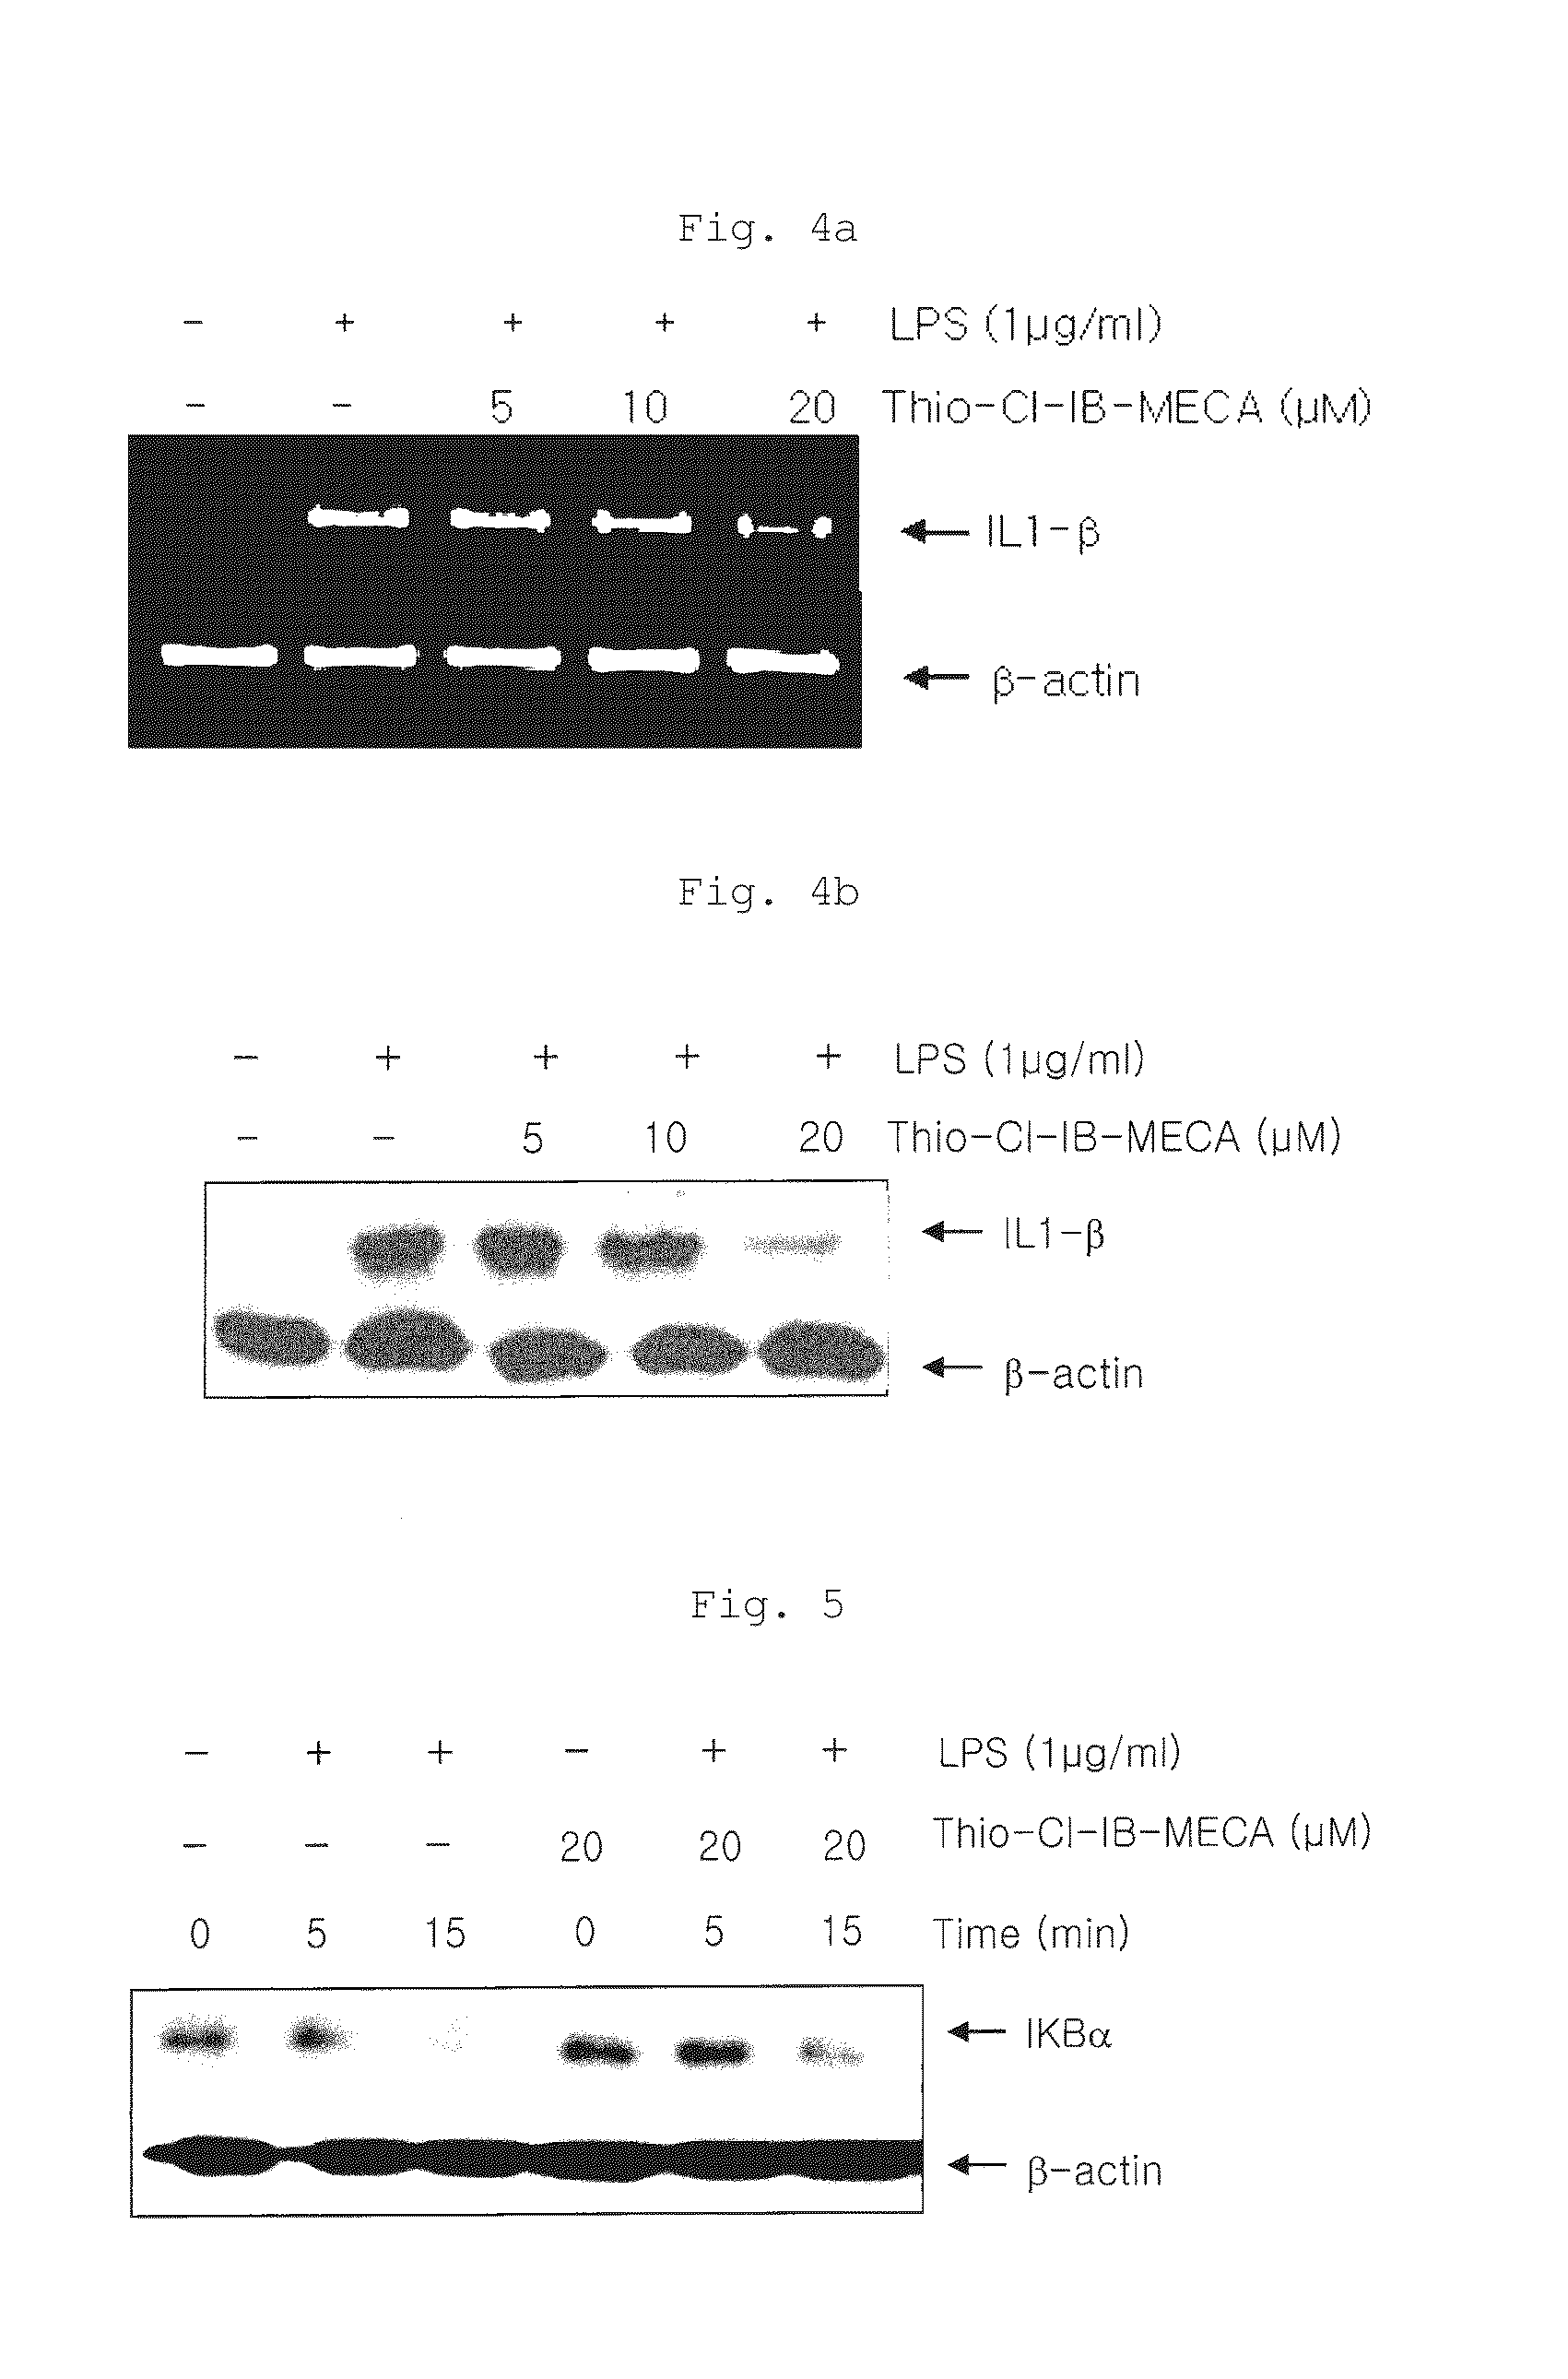 Method for treating prostate cancer by use of pharmaceutical composition containing a3 adenosine receptor agonist